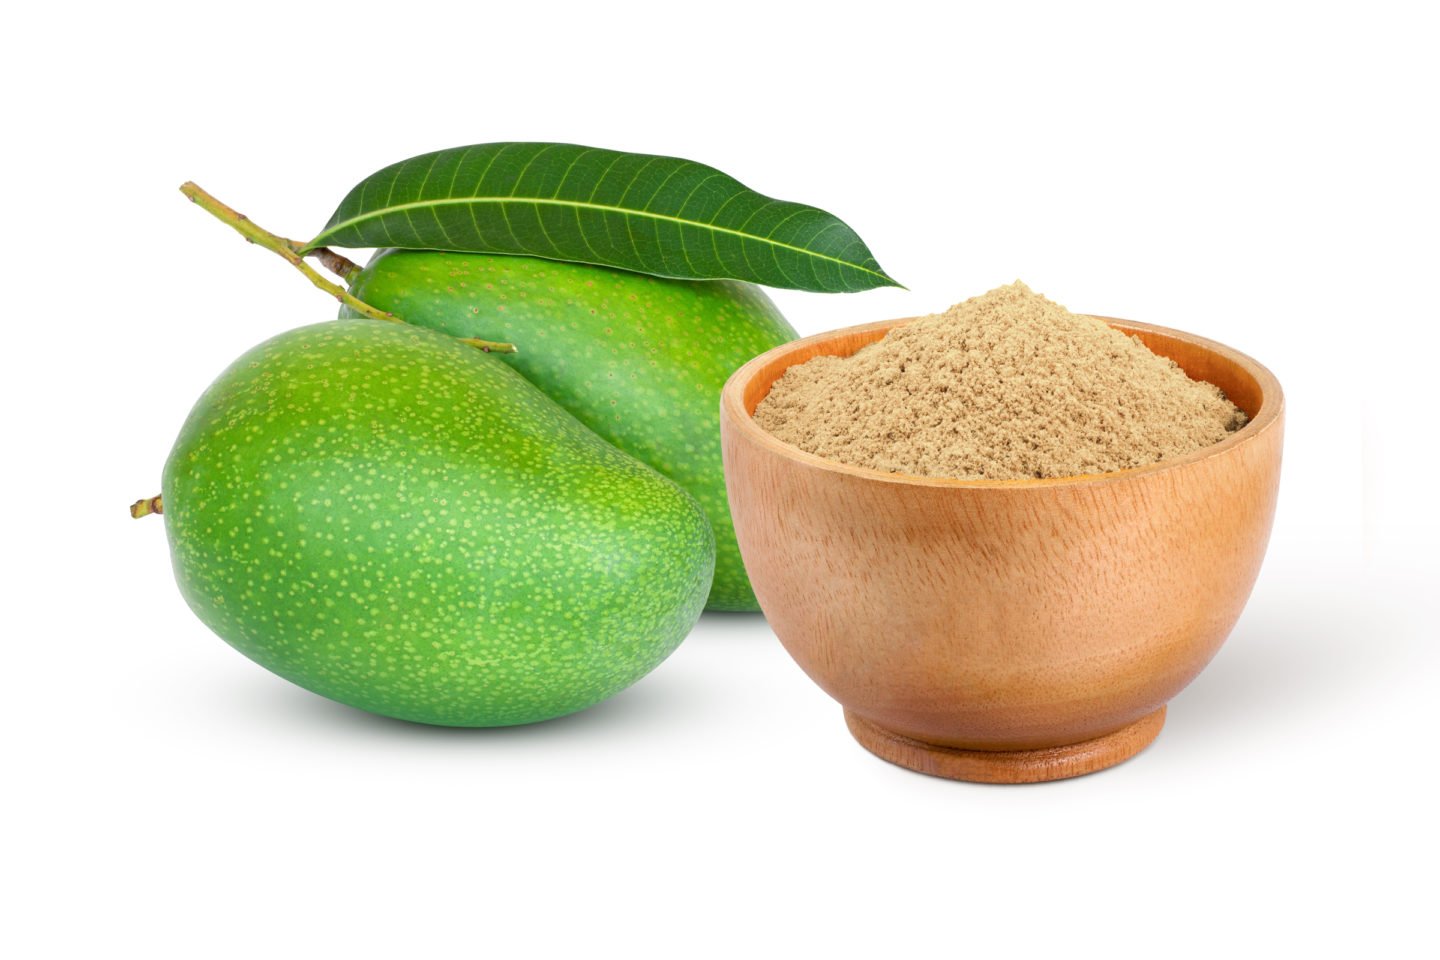 dry mango powder also known as amchur or amchoor is a popular Indian spice